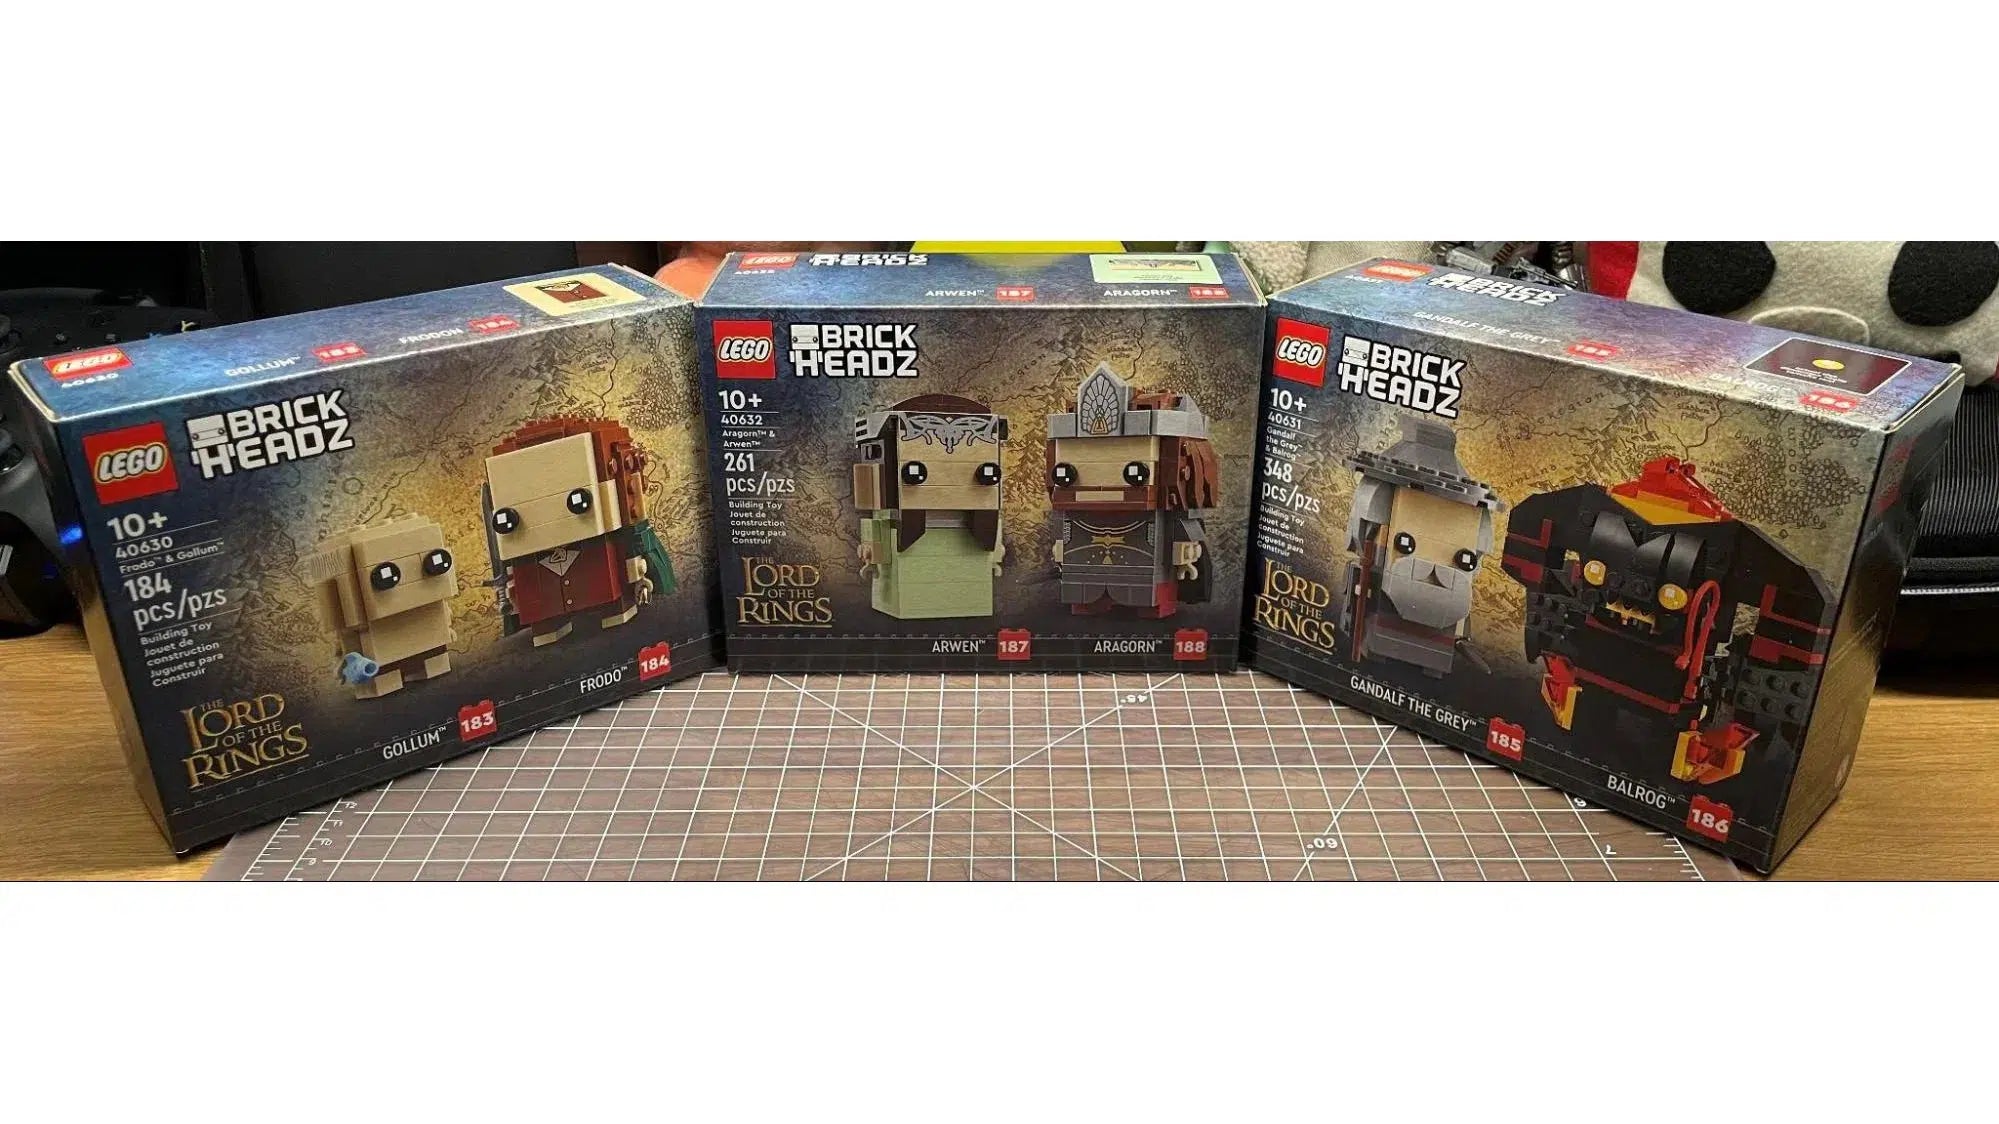 LEGO The Lord of the Rings BrickHeadz Build, Unboxing & Review - Poggers